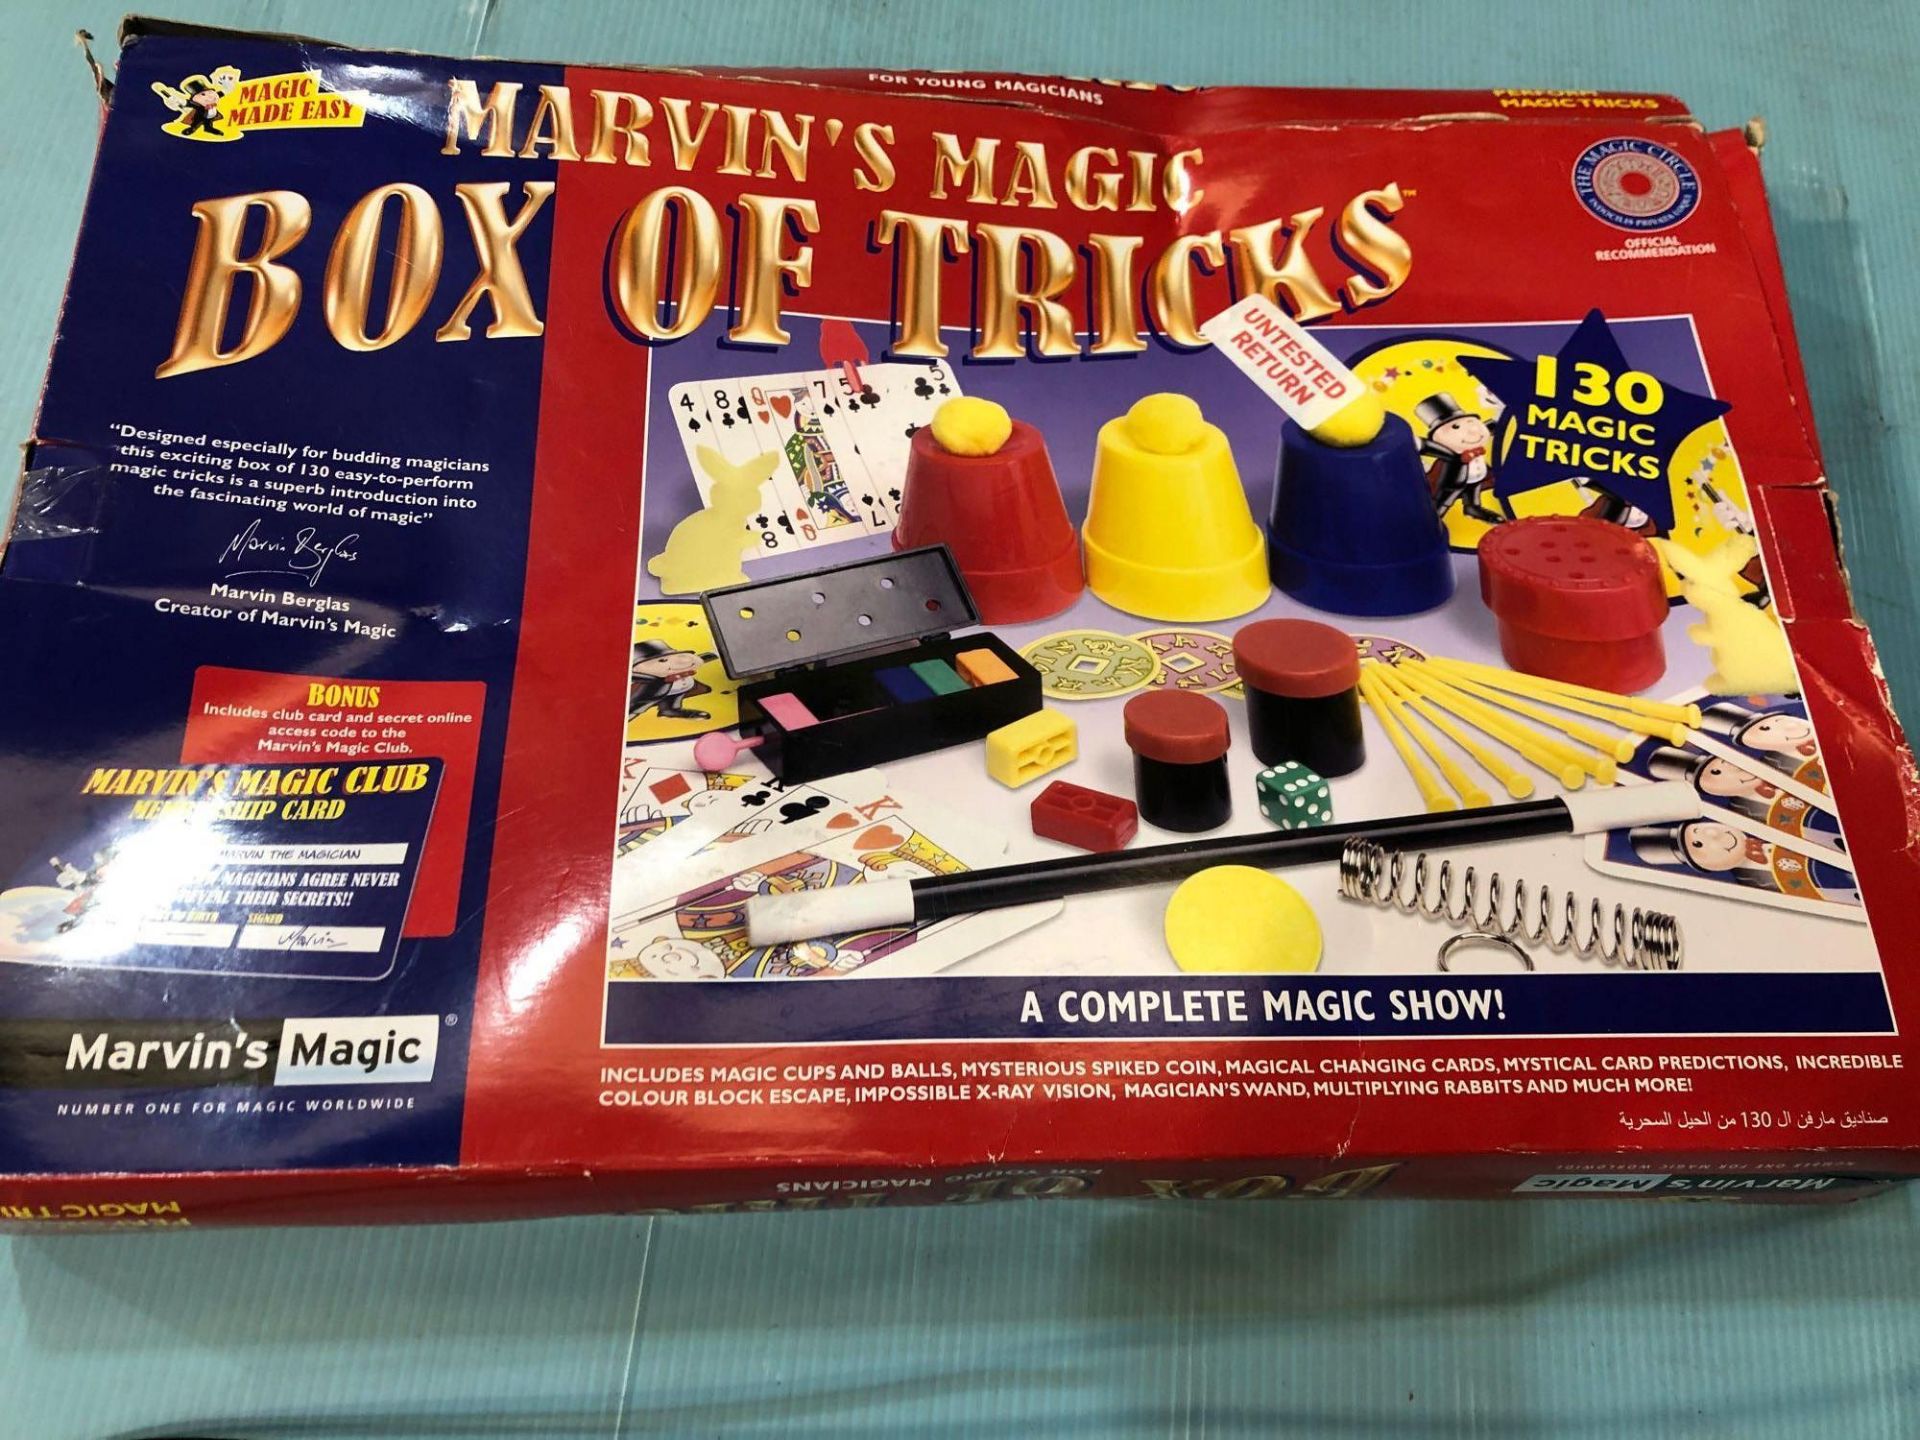 Xbox Controller | Marvin's Magic 130 Magic Made Easy Tricks £12.00 RRP - Image 4 of 7